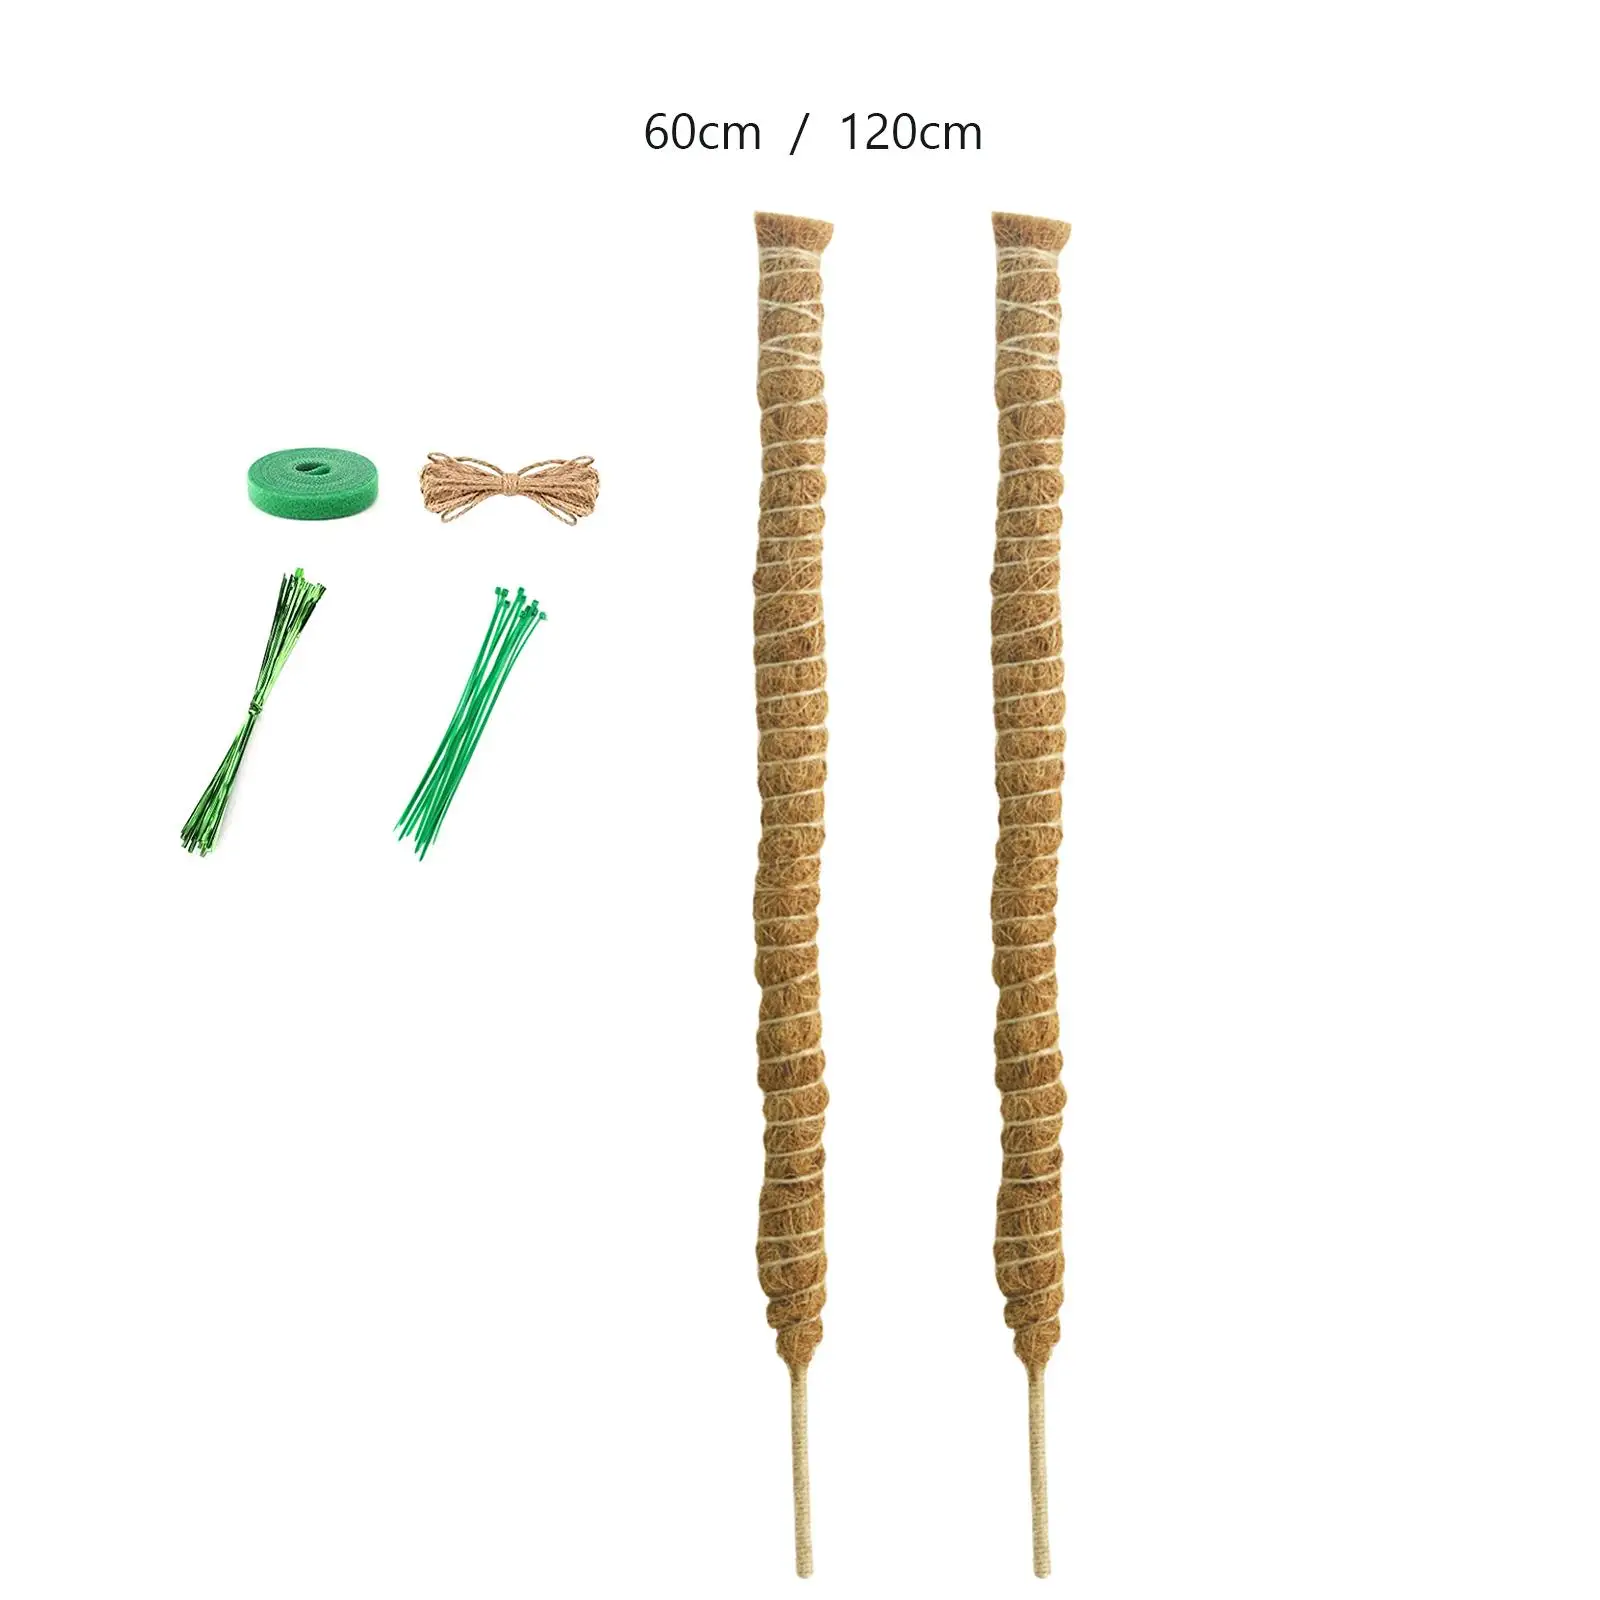 2x Coir Moss Stick with Jute Rope and Ties Extension Plant Climbing Pole for Monstera Courtyard Potted Indoor Garden